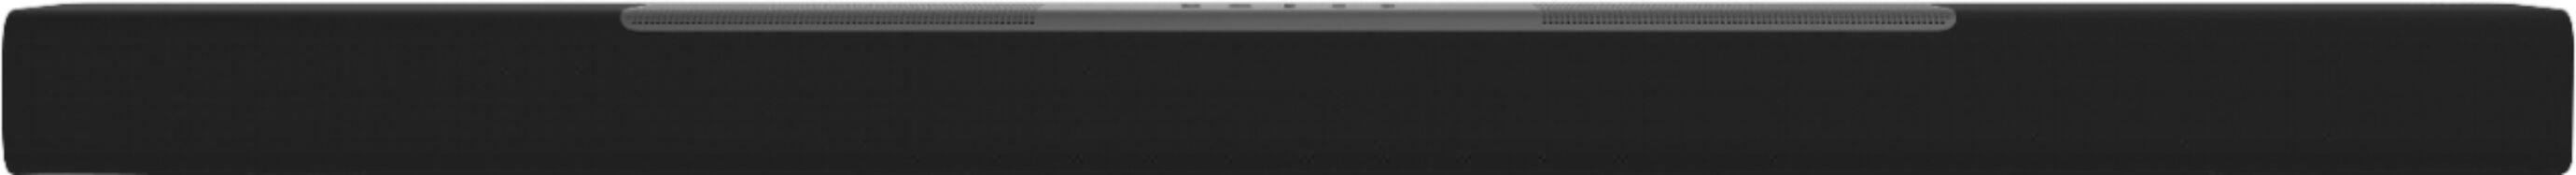 VIZIO 5.1.2-Channel M-Series Premium Sound Bar with Wireless Subwoofer, Dolby Atmos DTS:X Charcoal M512a-H6 - Buy